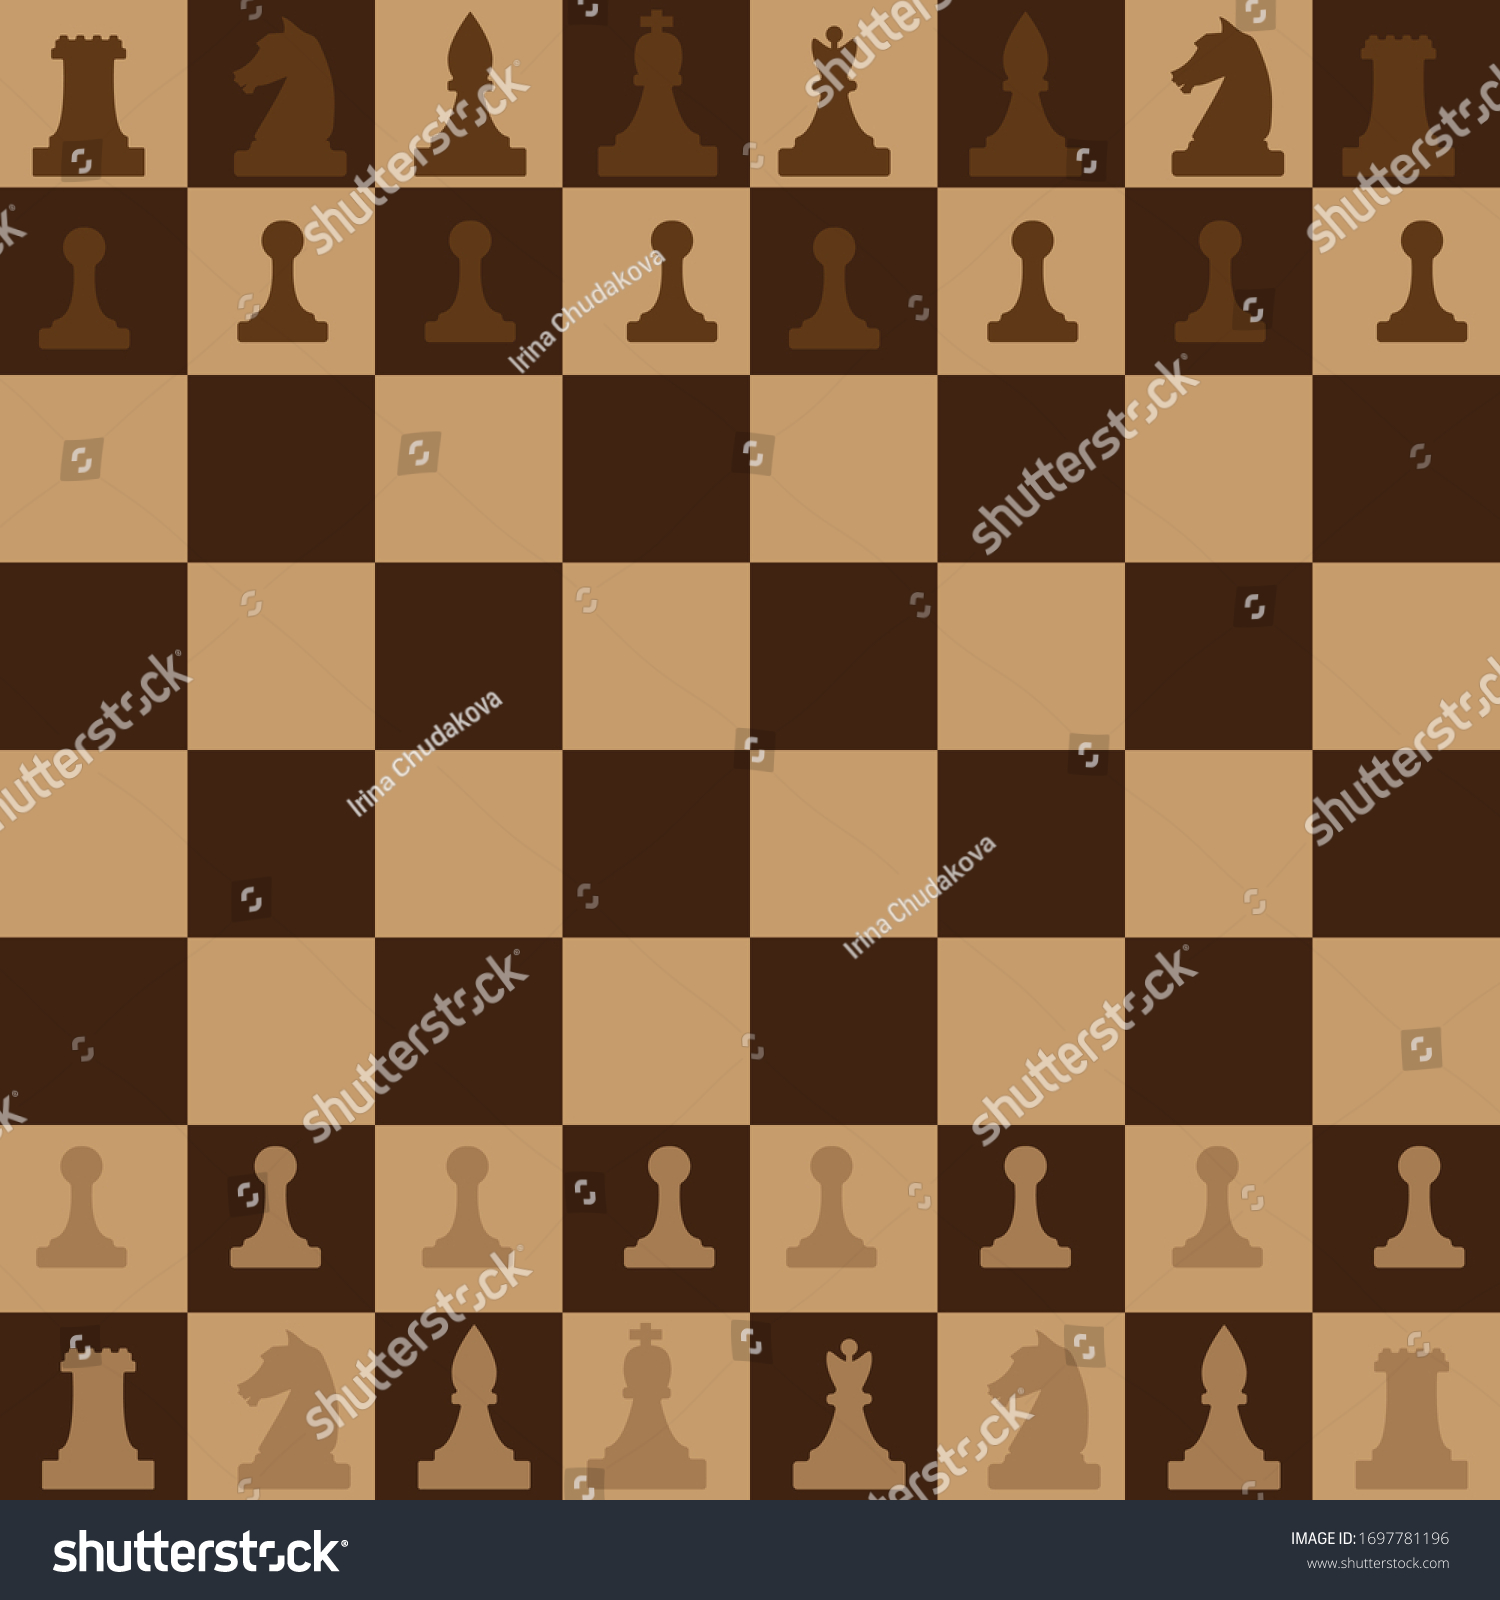 SVG of A chessboard with a full set of pieces arranged on it. All elements are isolated. svg